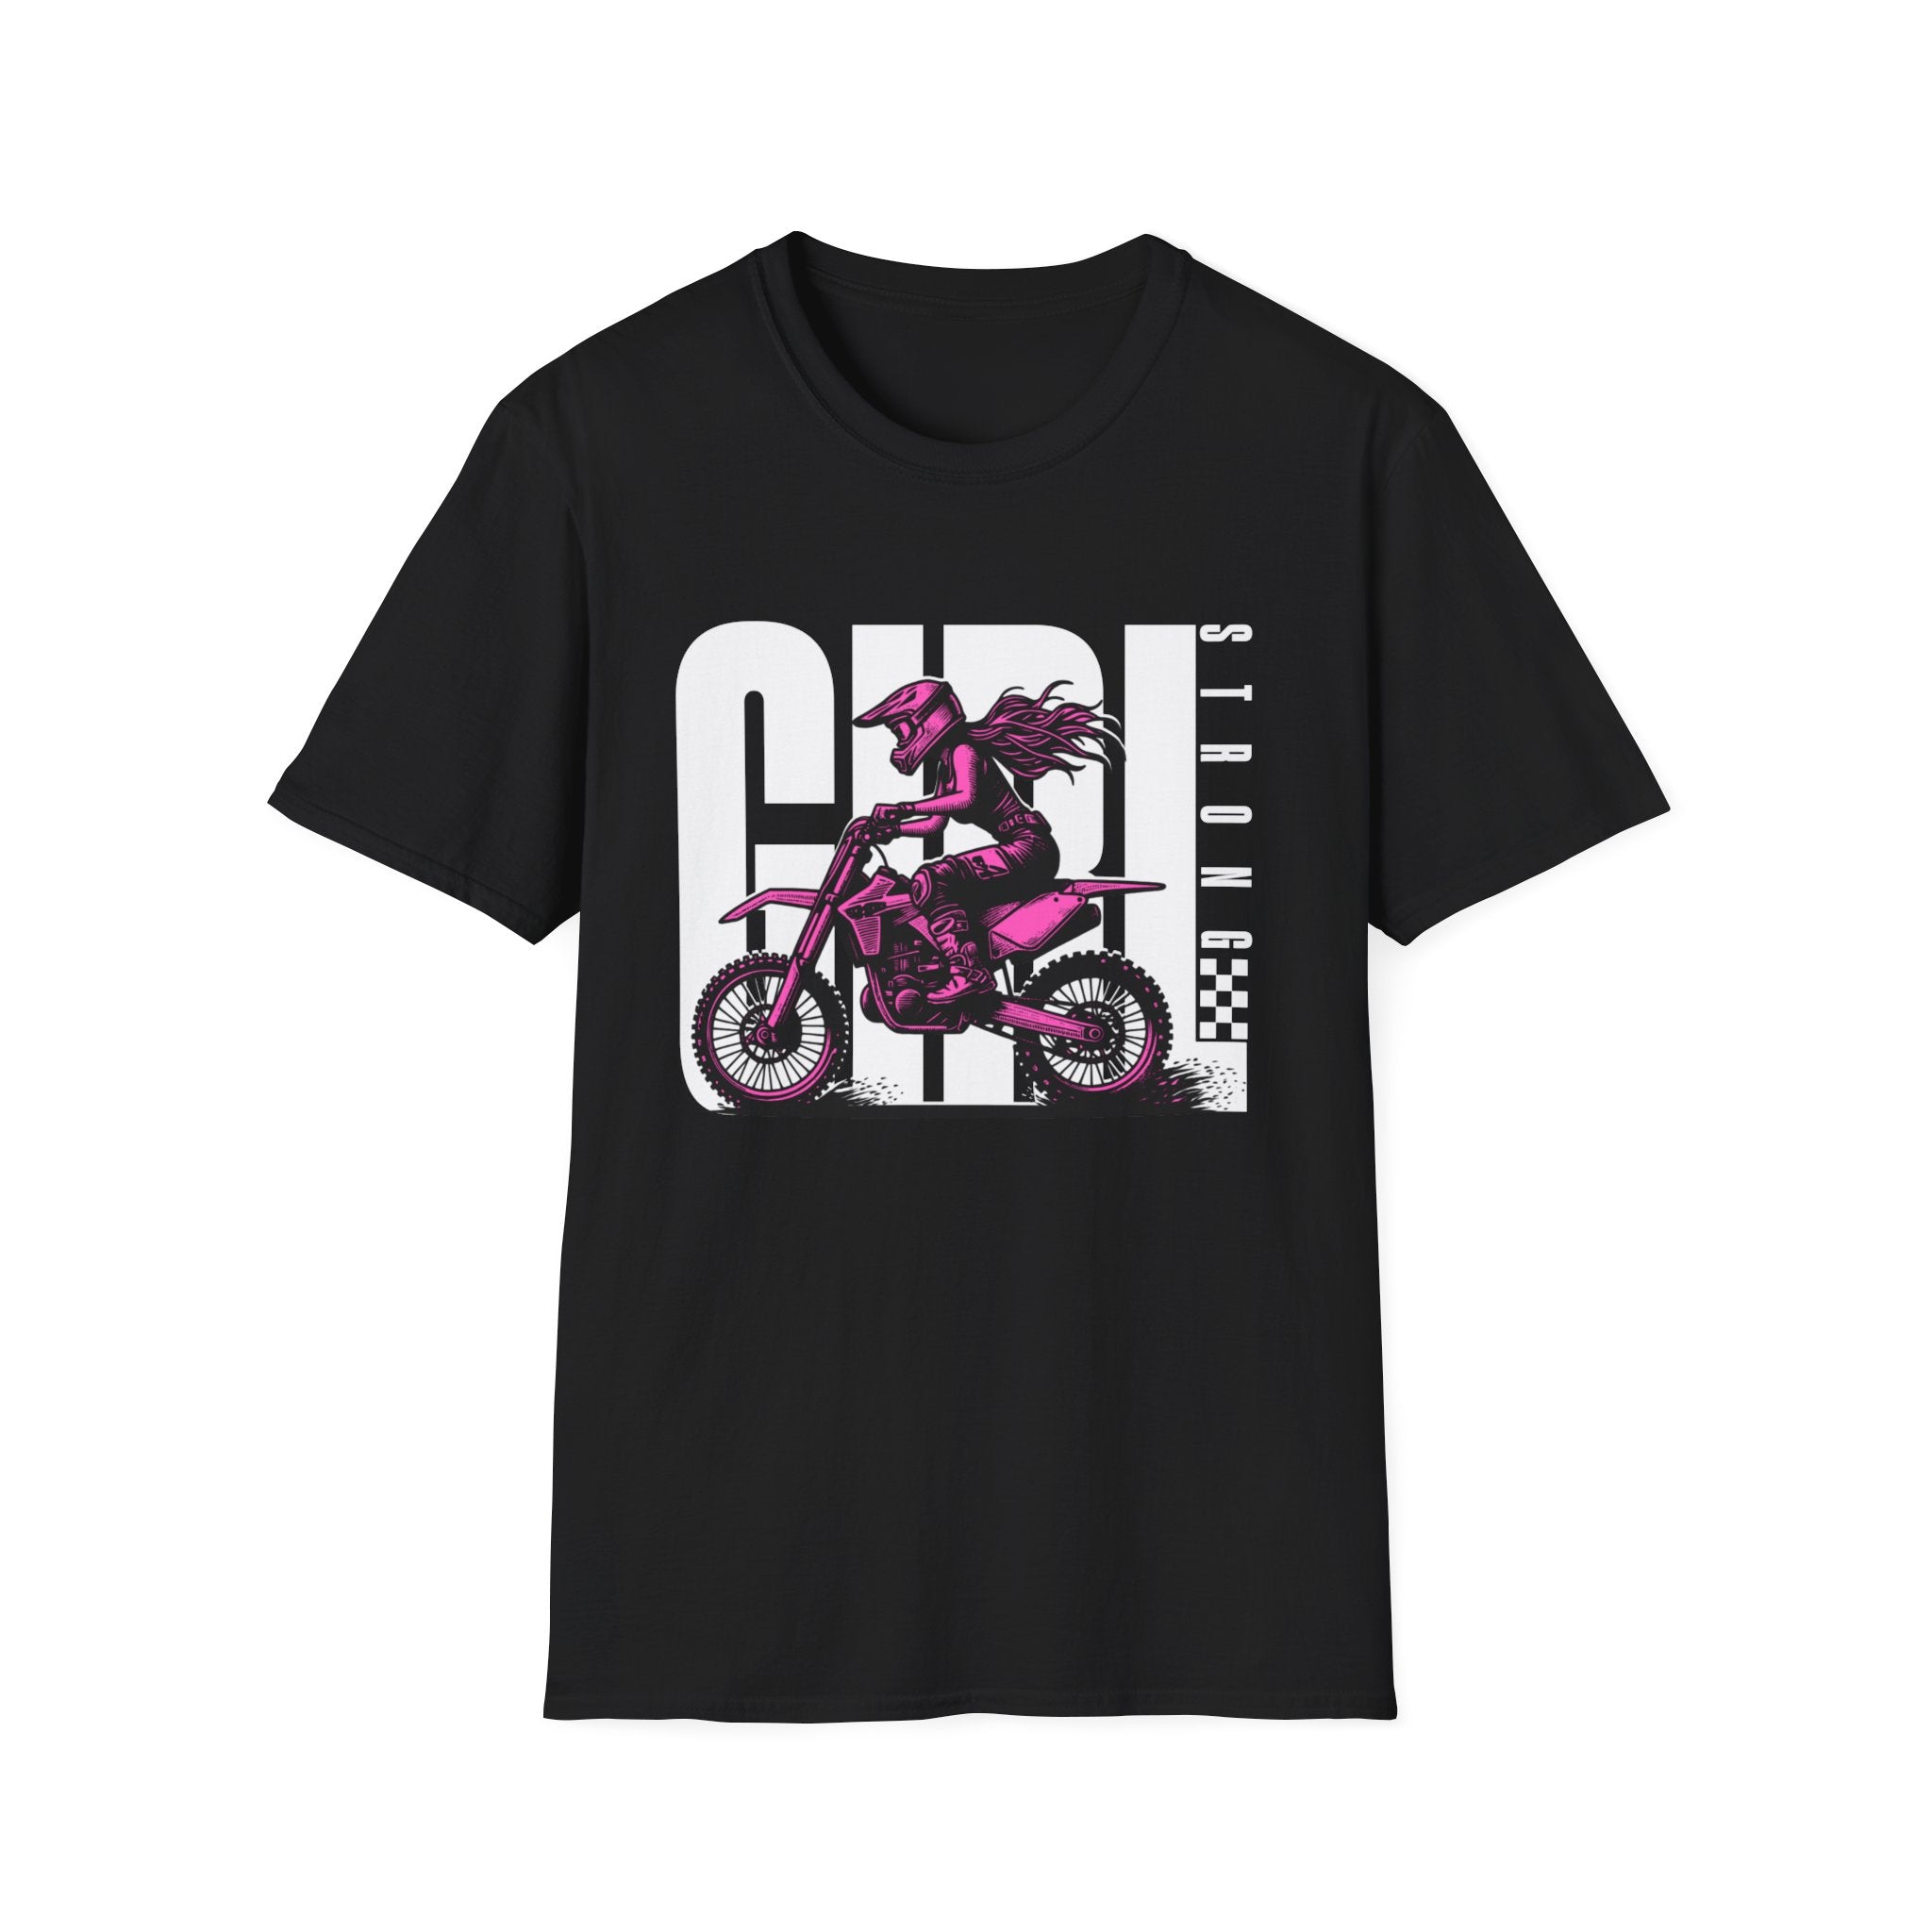 Strong Girl - Unisex Softstyle T-Shirt